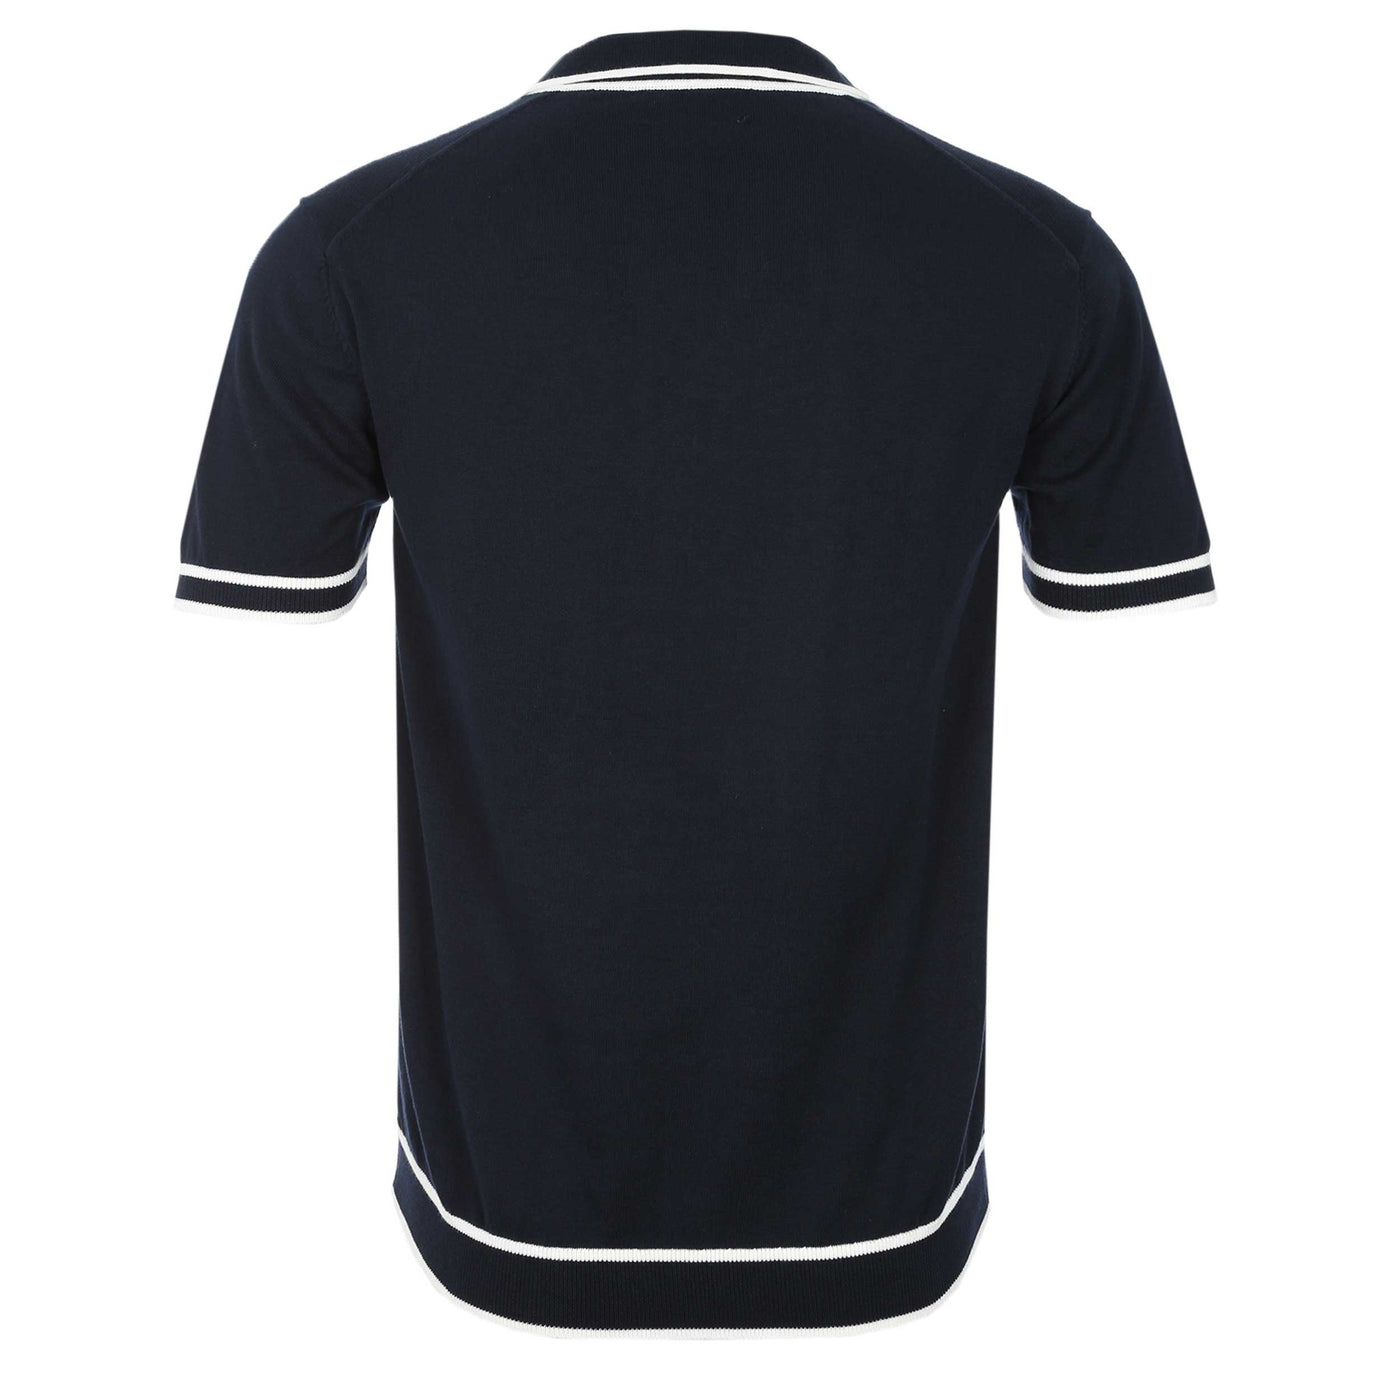 Oliver Sweeney Garras Knit Polo Shirt in Navy